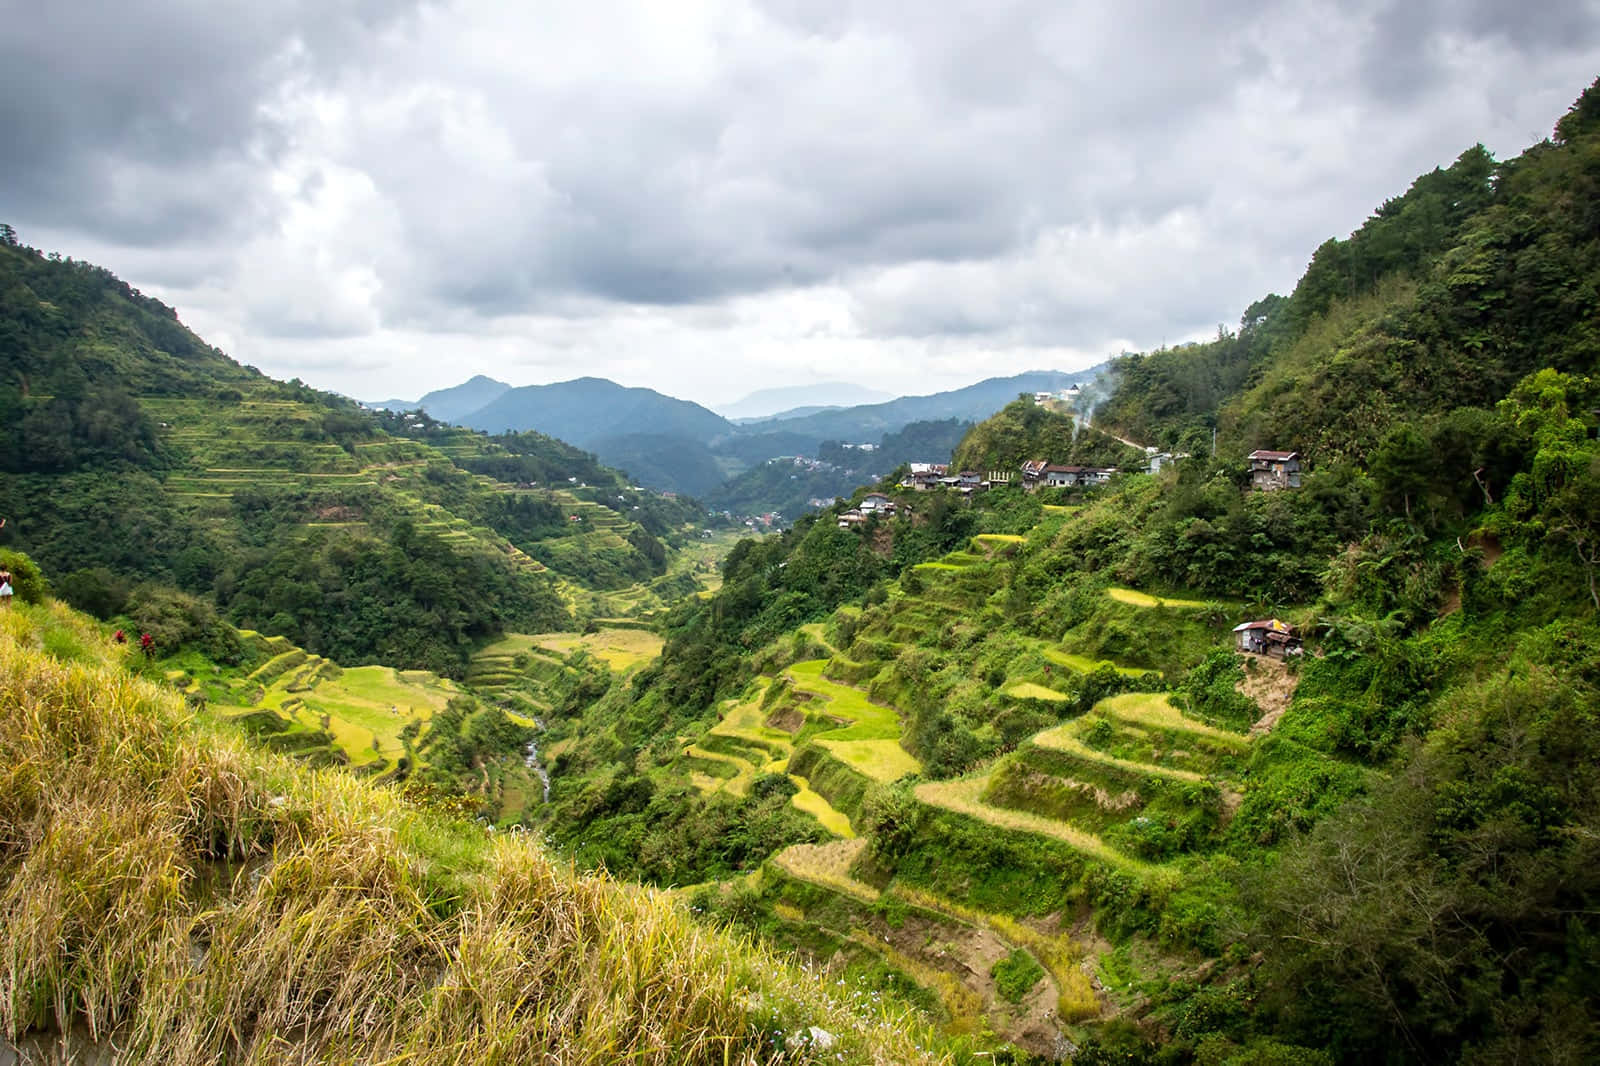 Banaue Rice Terraces In The Philippines During Cloudy Day Wallpaper